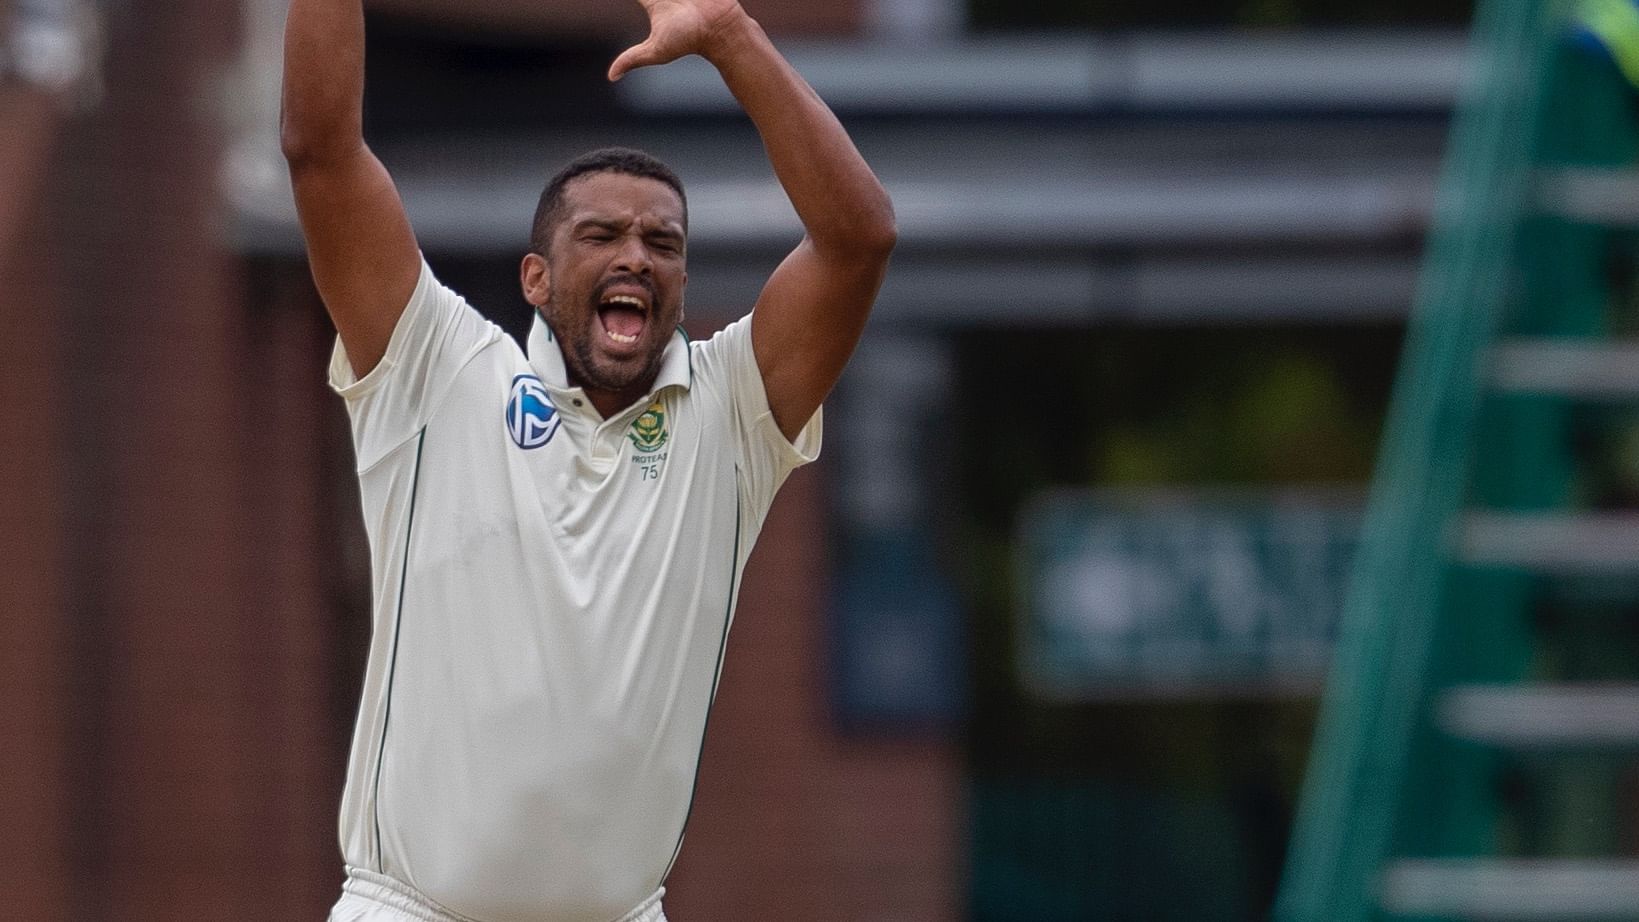 South Africa seam bowler Vernon Philander was fined for provoking England batsman Jos Buttler and also left the field injured in his final test on Sunday, 26 January.